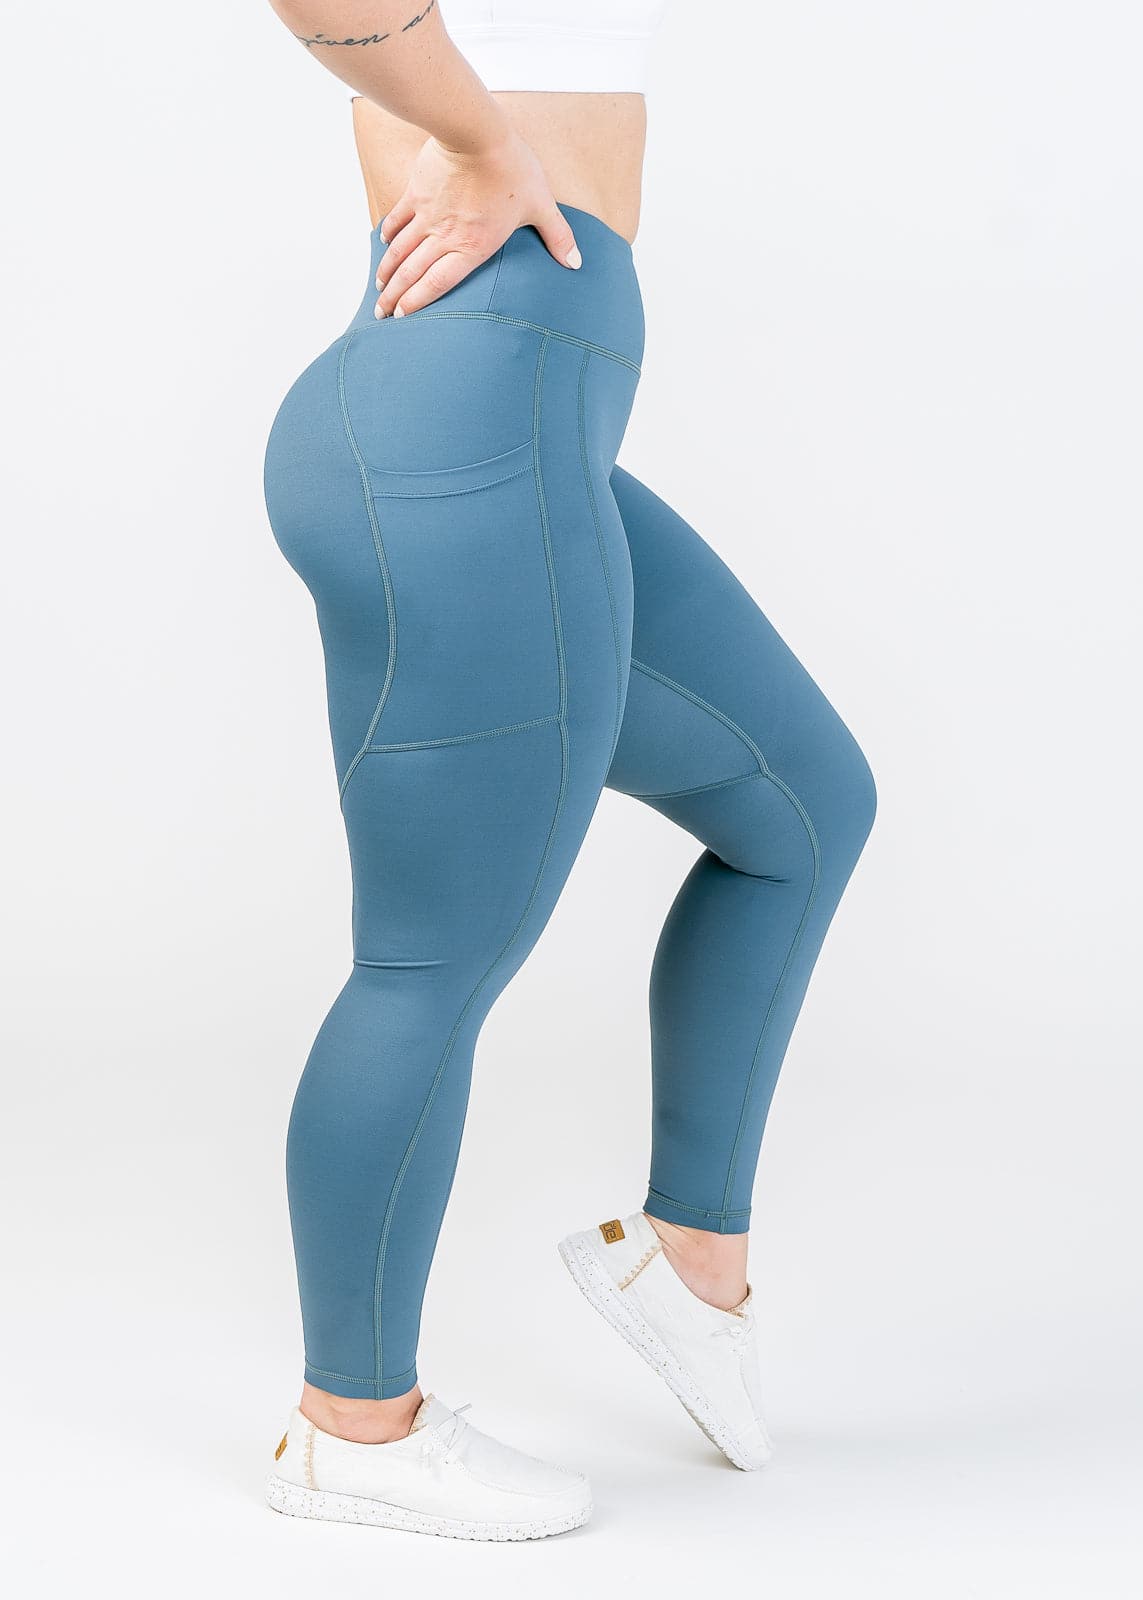 Empowered Leggings With Pockets | Blue Spruce